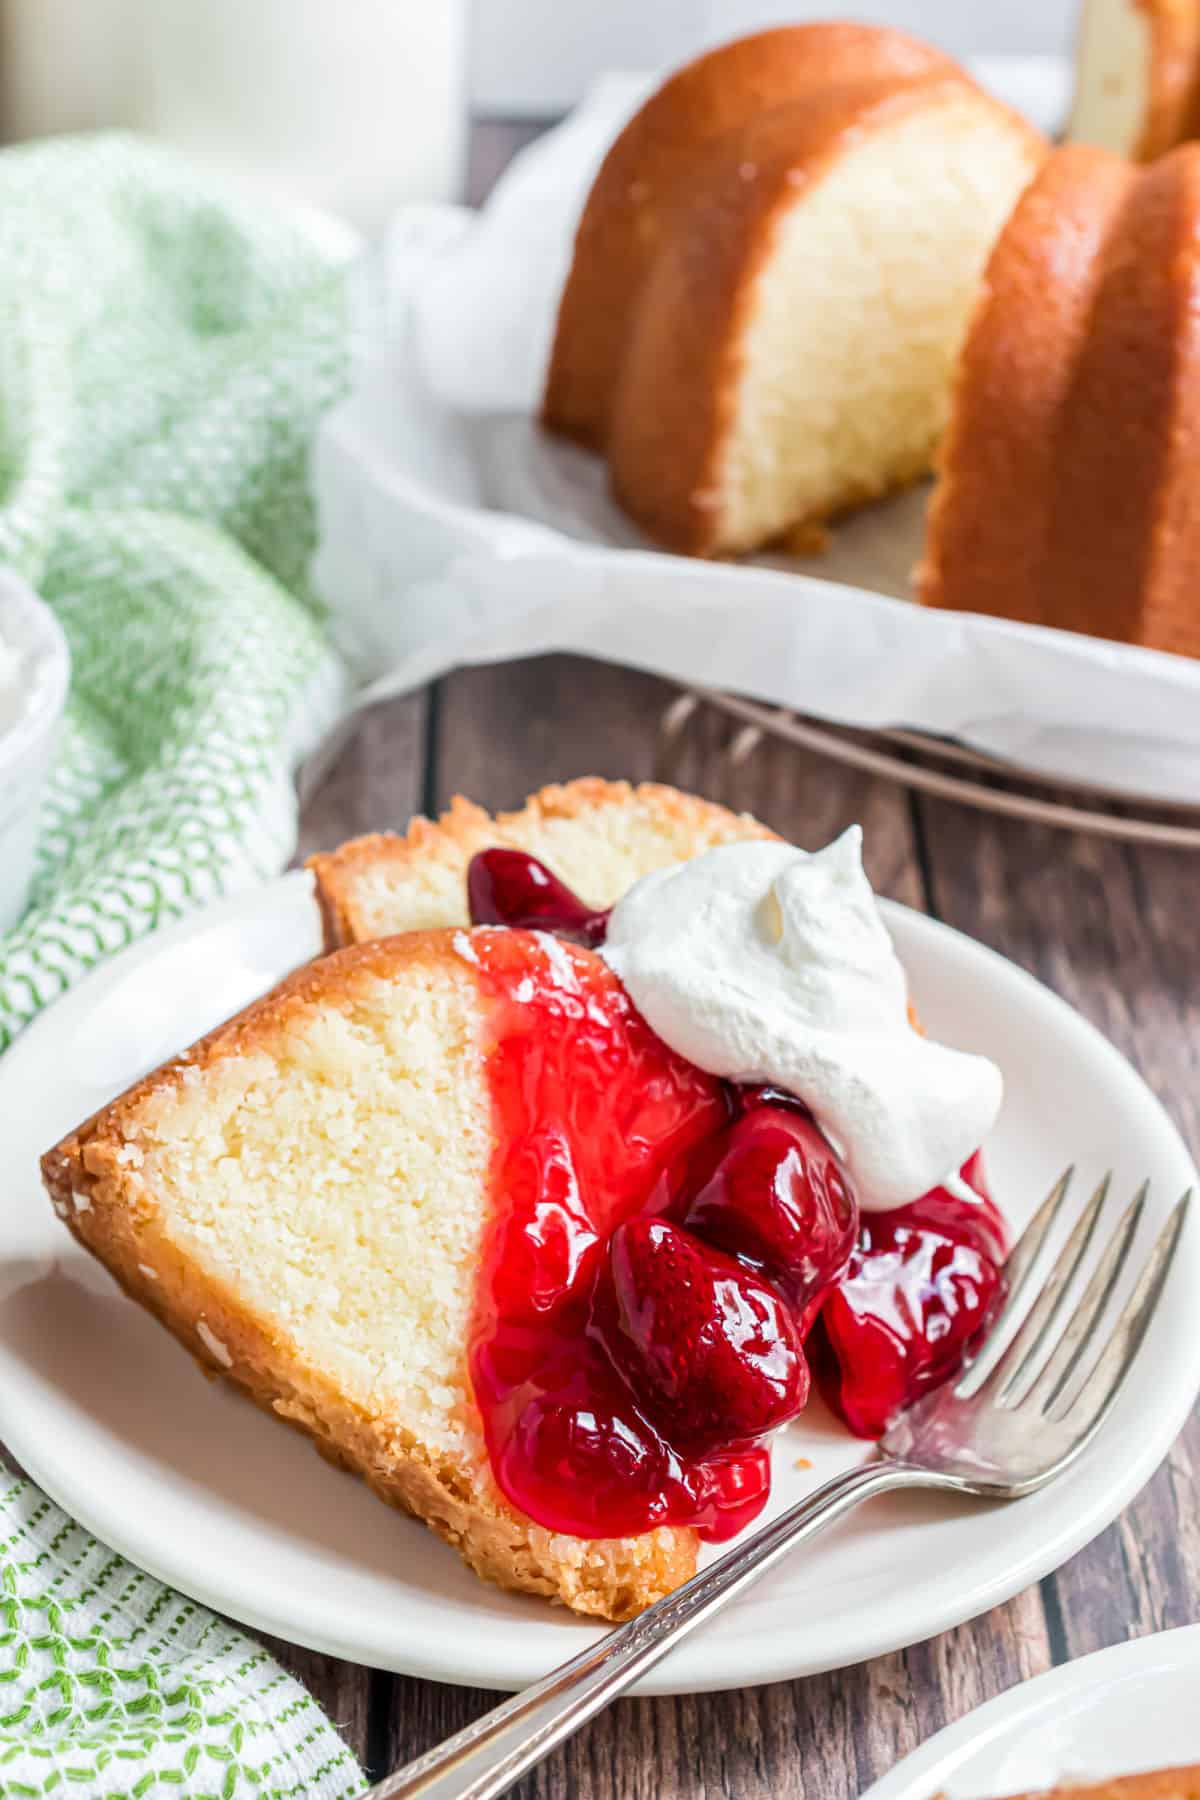 Slices of pound cake on a plate with strawberry and whipped cream.